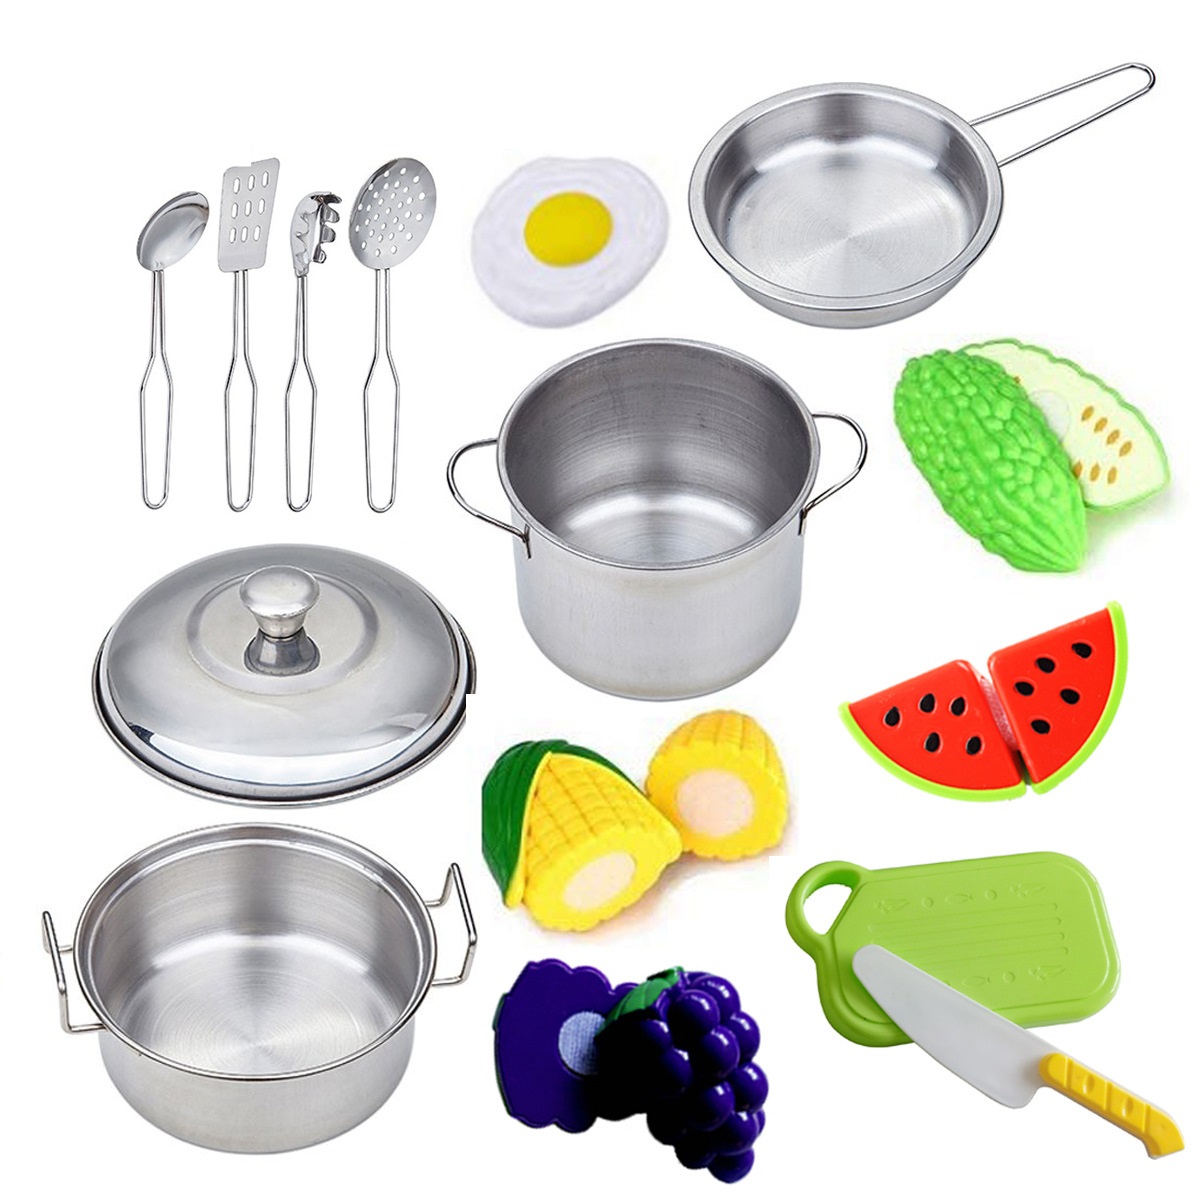 Simulation Small Appliances Kitchen Utensils Cookware Play Children's Toys Gifts 